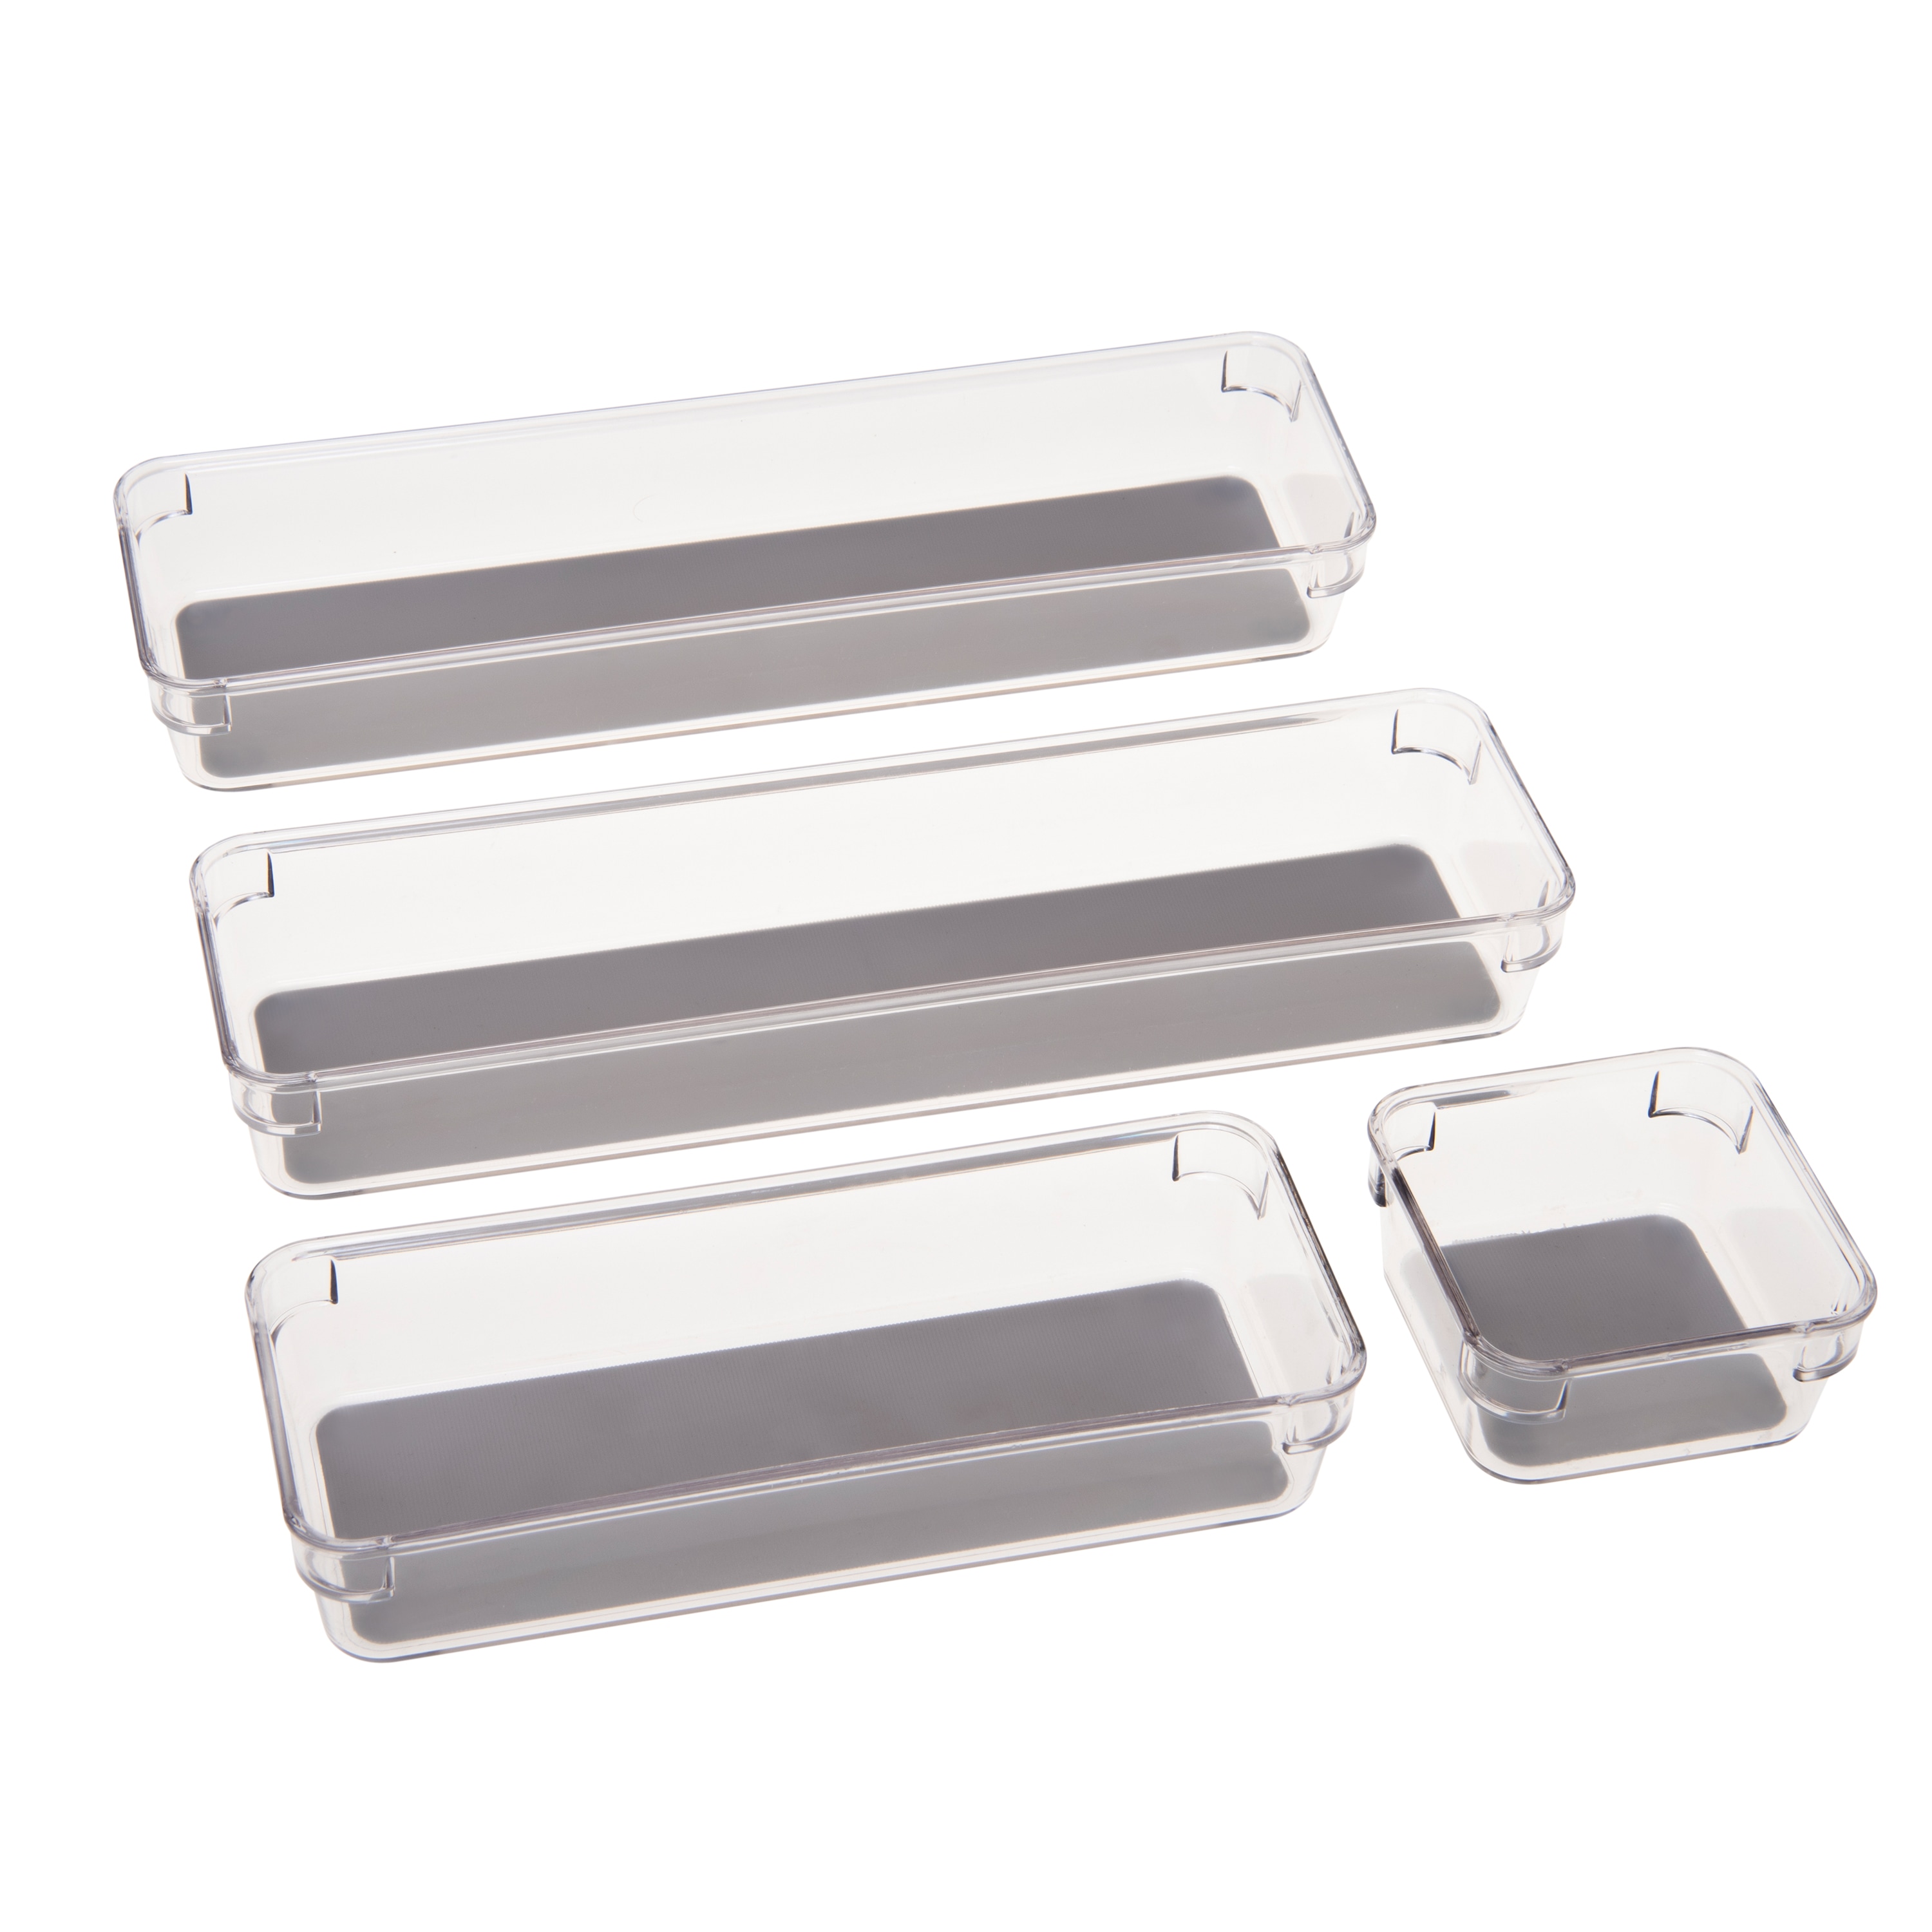 Plastic Clear Drawer Organizers at